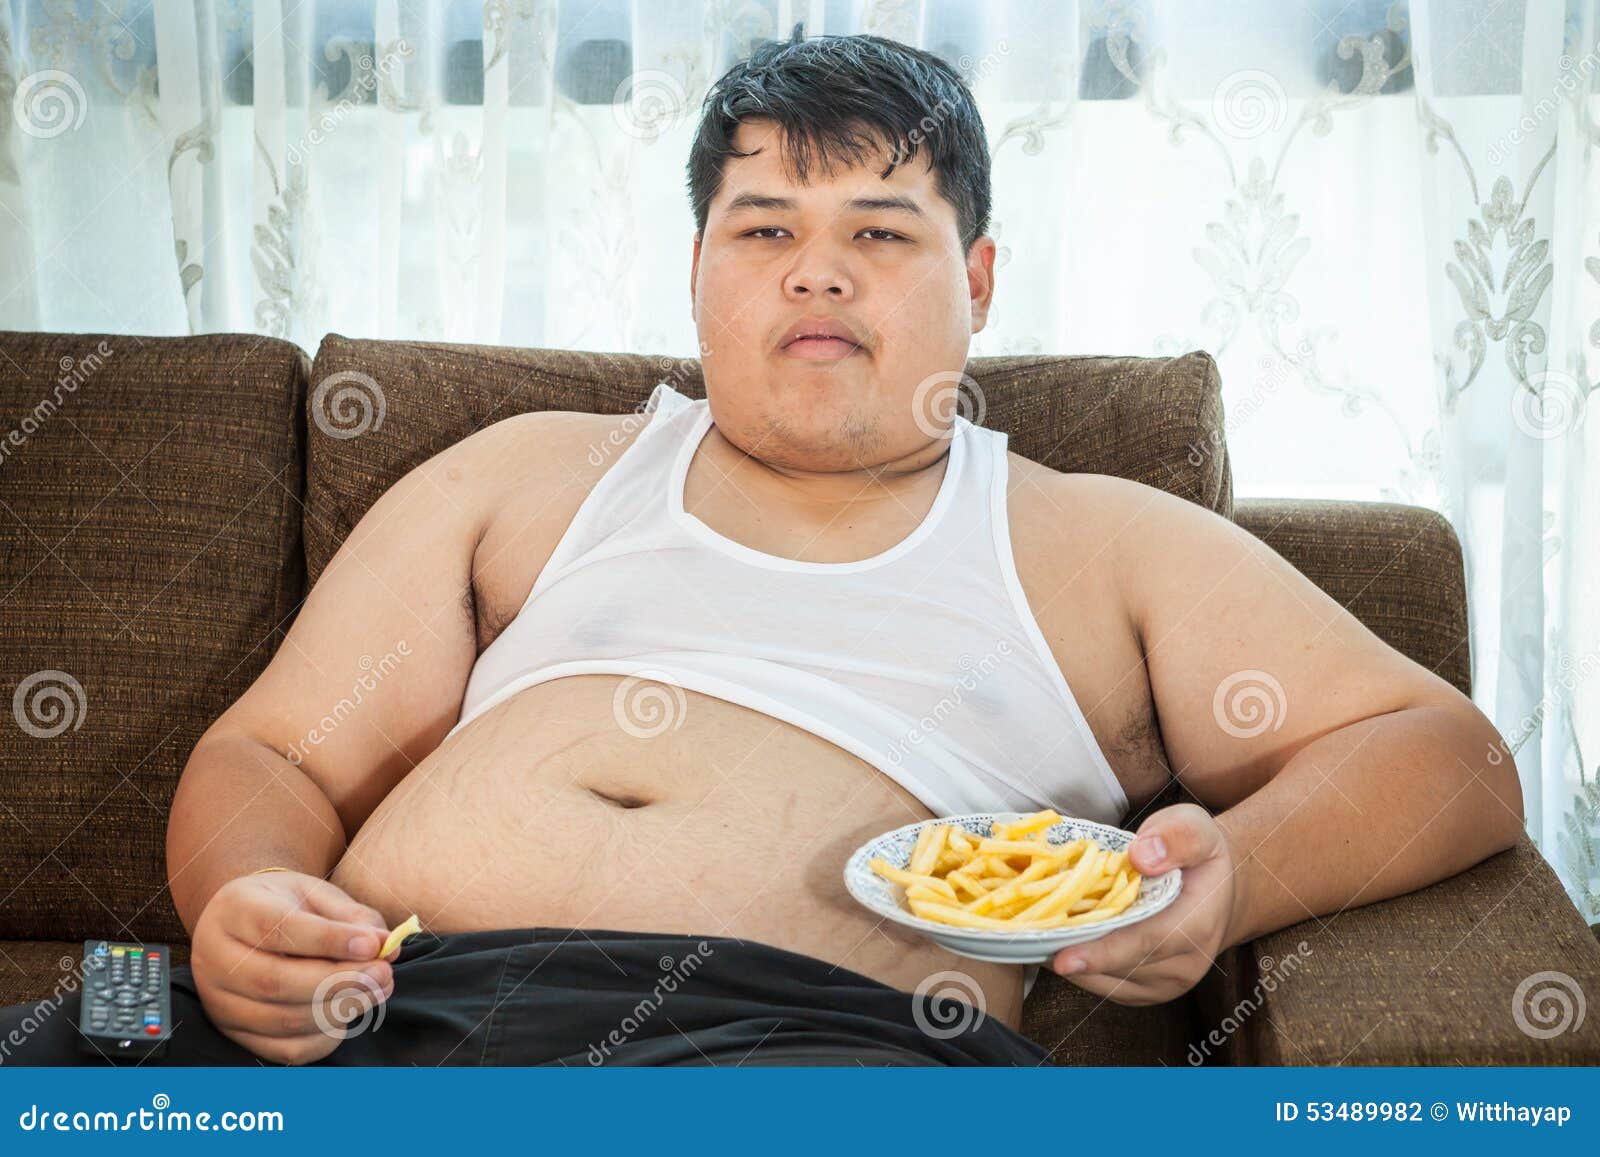 lazy-overweight-male-sitting-fast-food-a